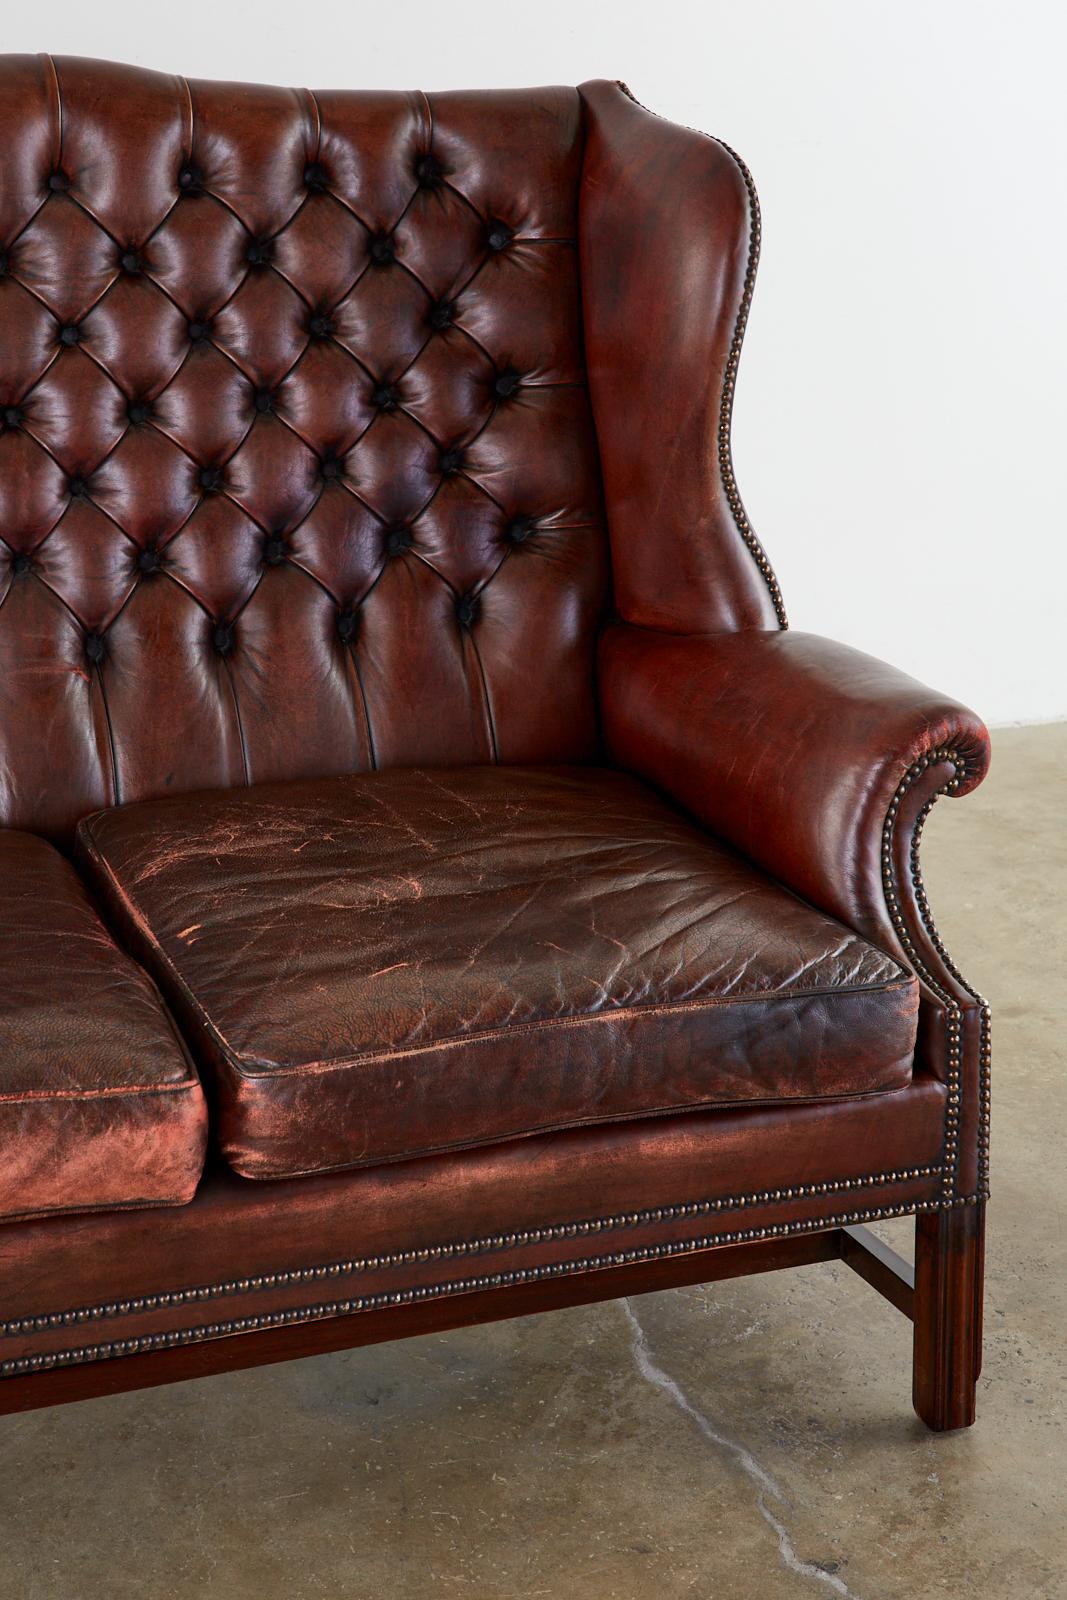 20th Century English Georgian Style Tufted Leather Chesterfield Wingback Settee